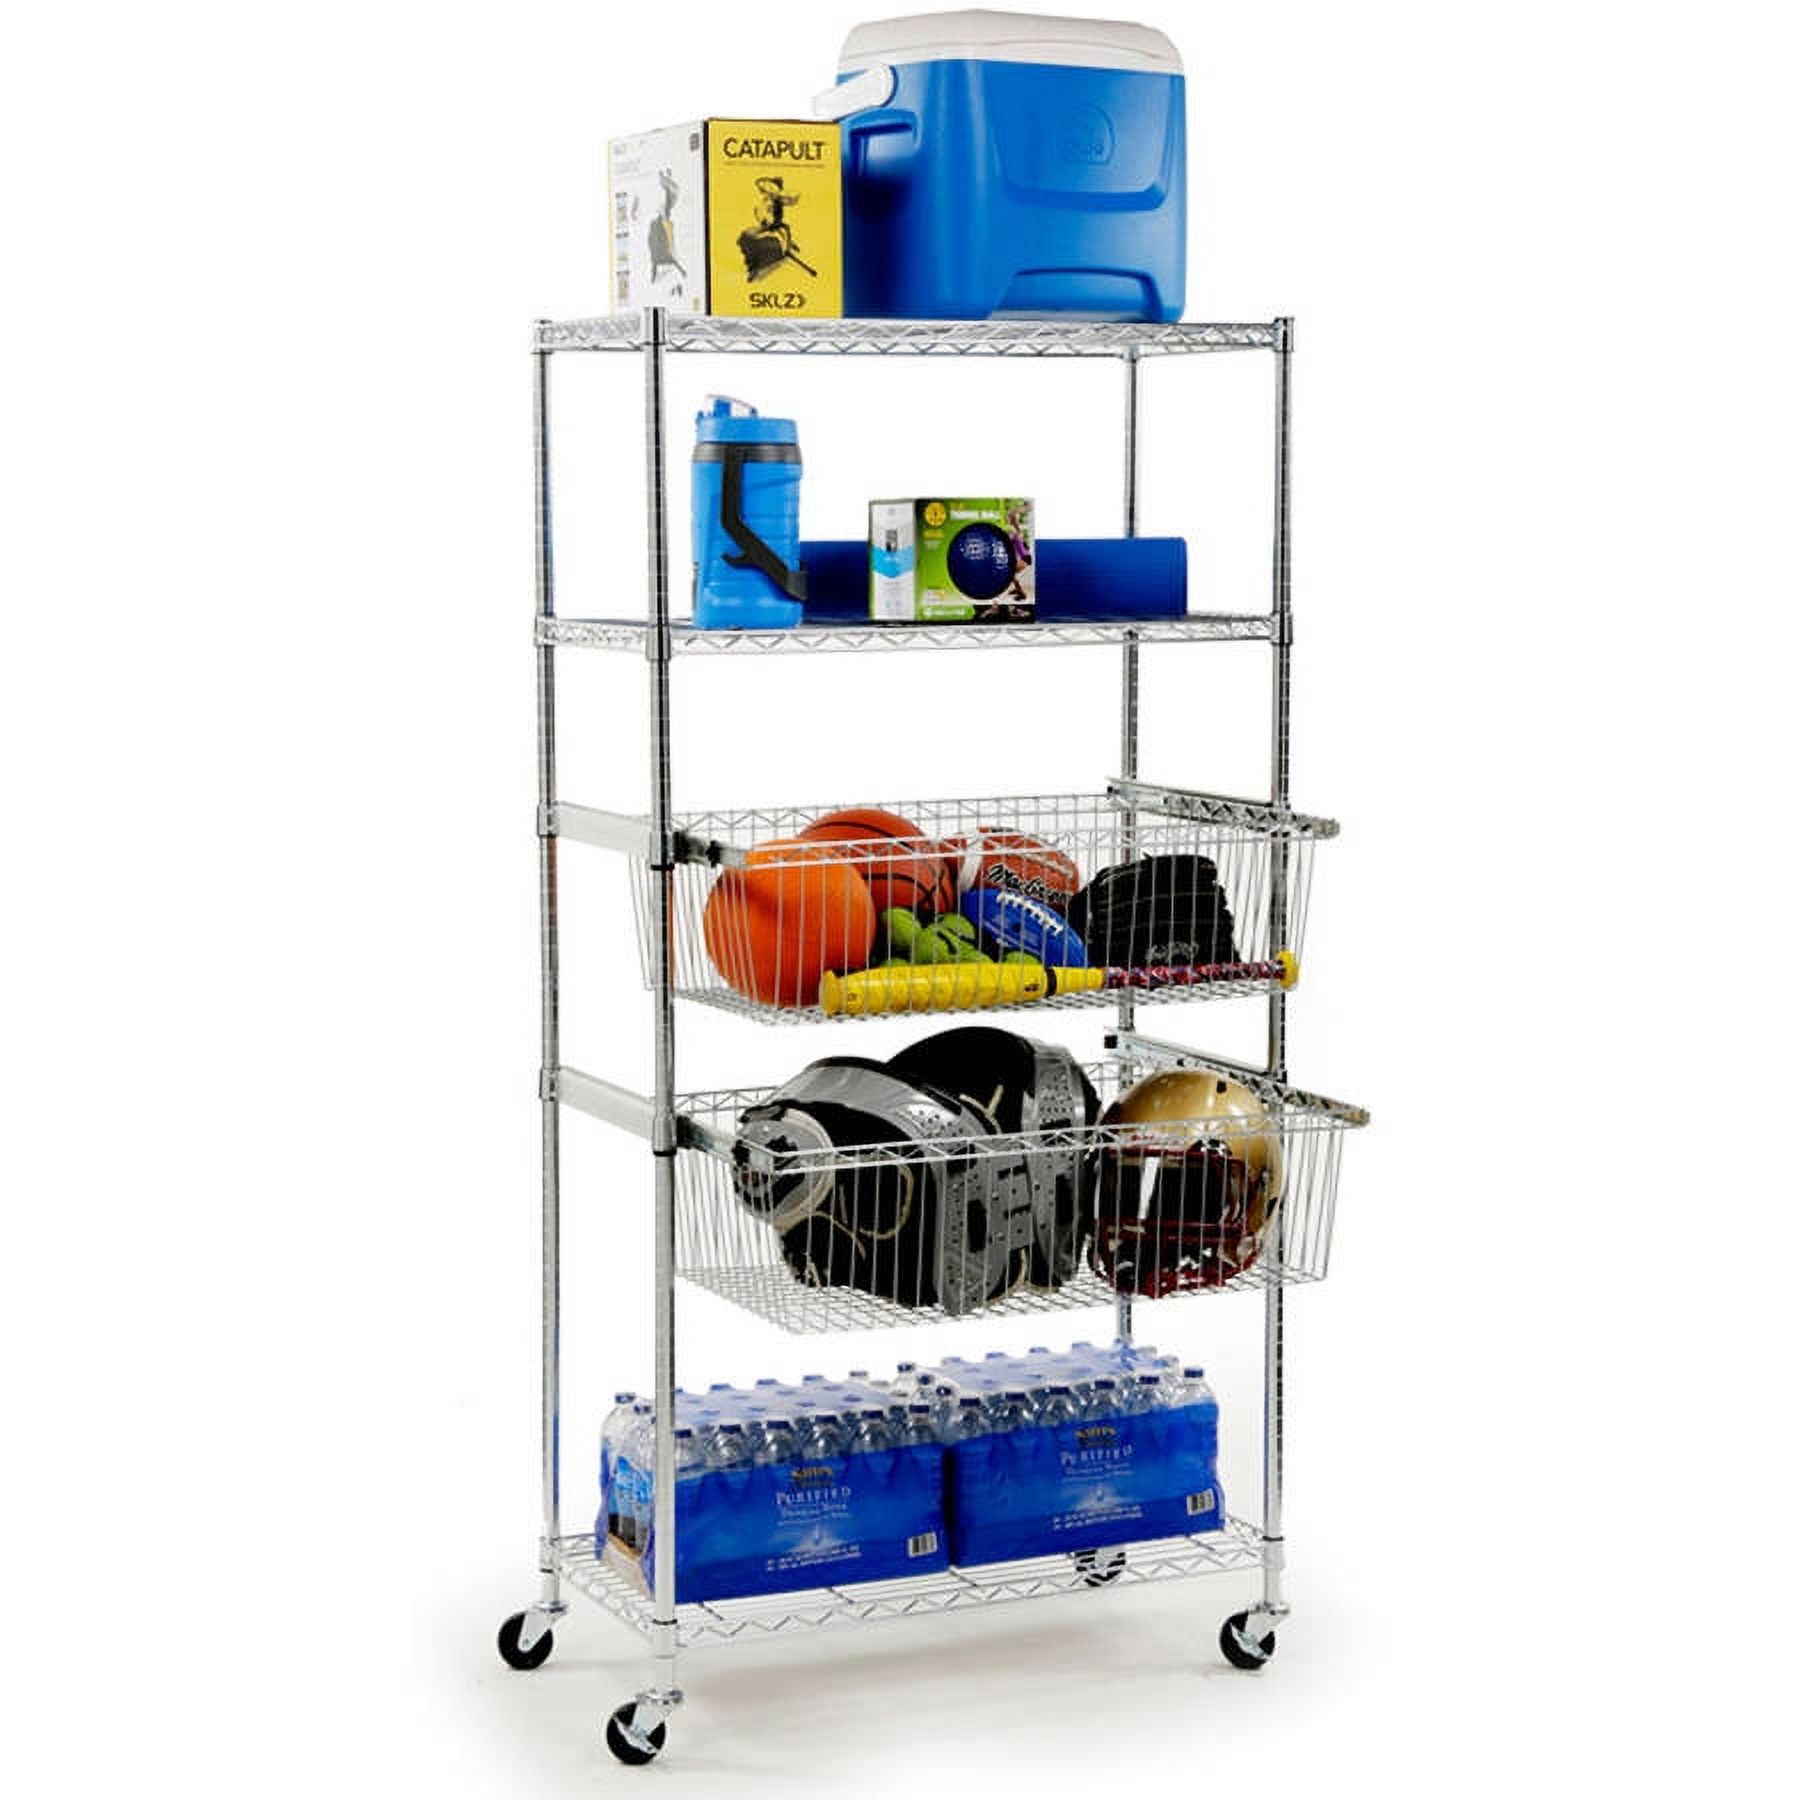 Seville Classics 5-Tier Steel Wire Shelving System with Pull-Out Bins, 18"L x 36"W x 71"H - image 2 of 4